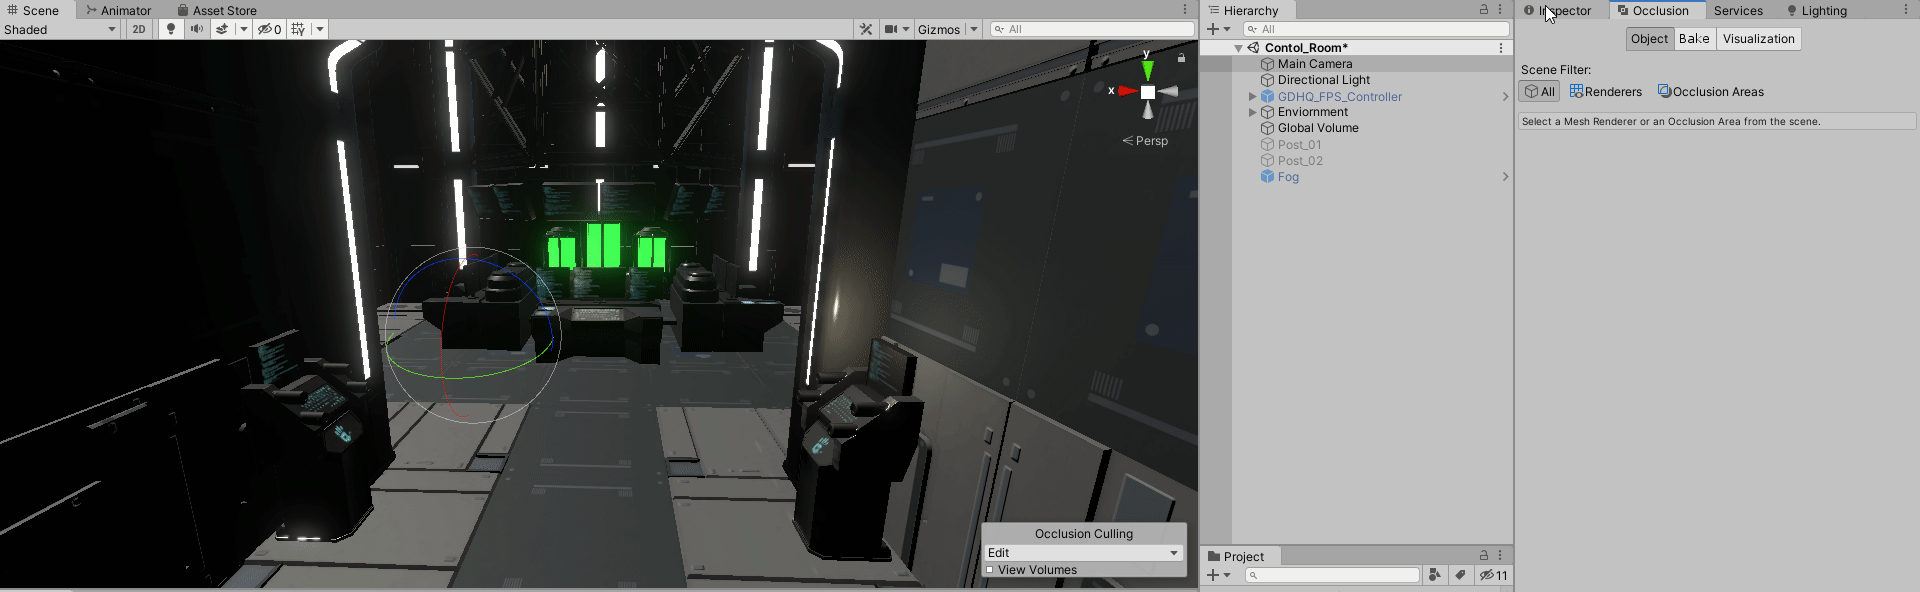 Occlusion Culling still rendering hidden gameobjects. - Questions & Answers  - Unity Discussions